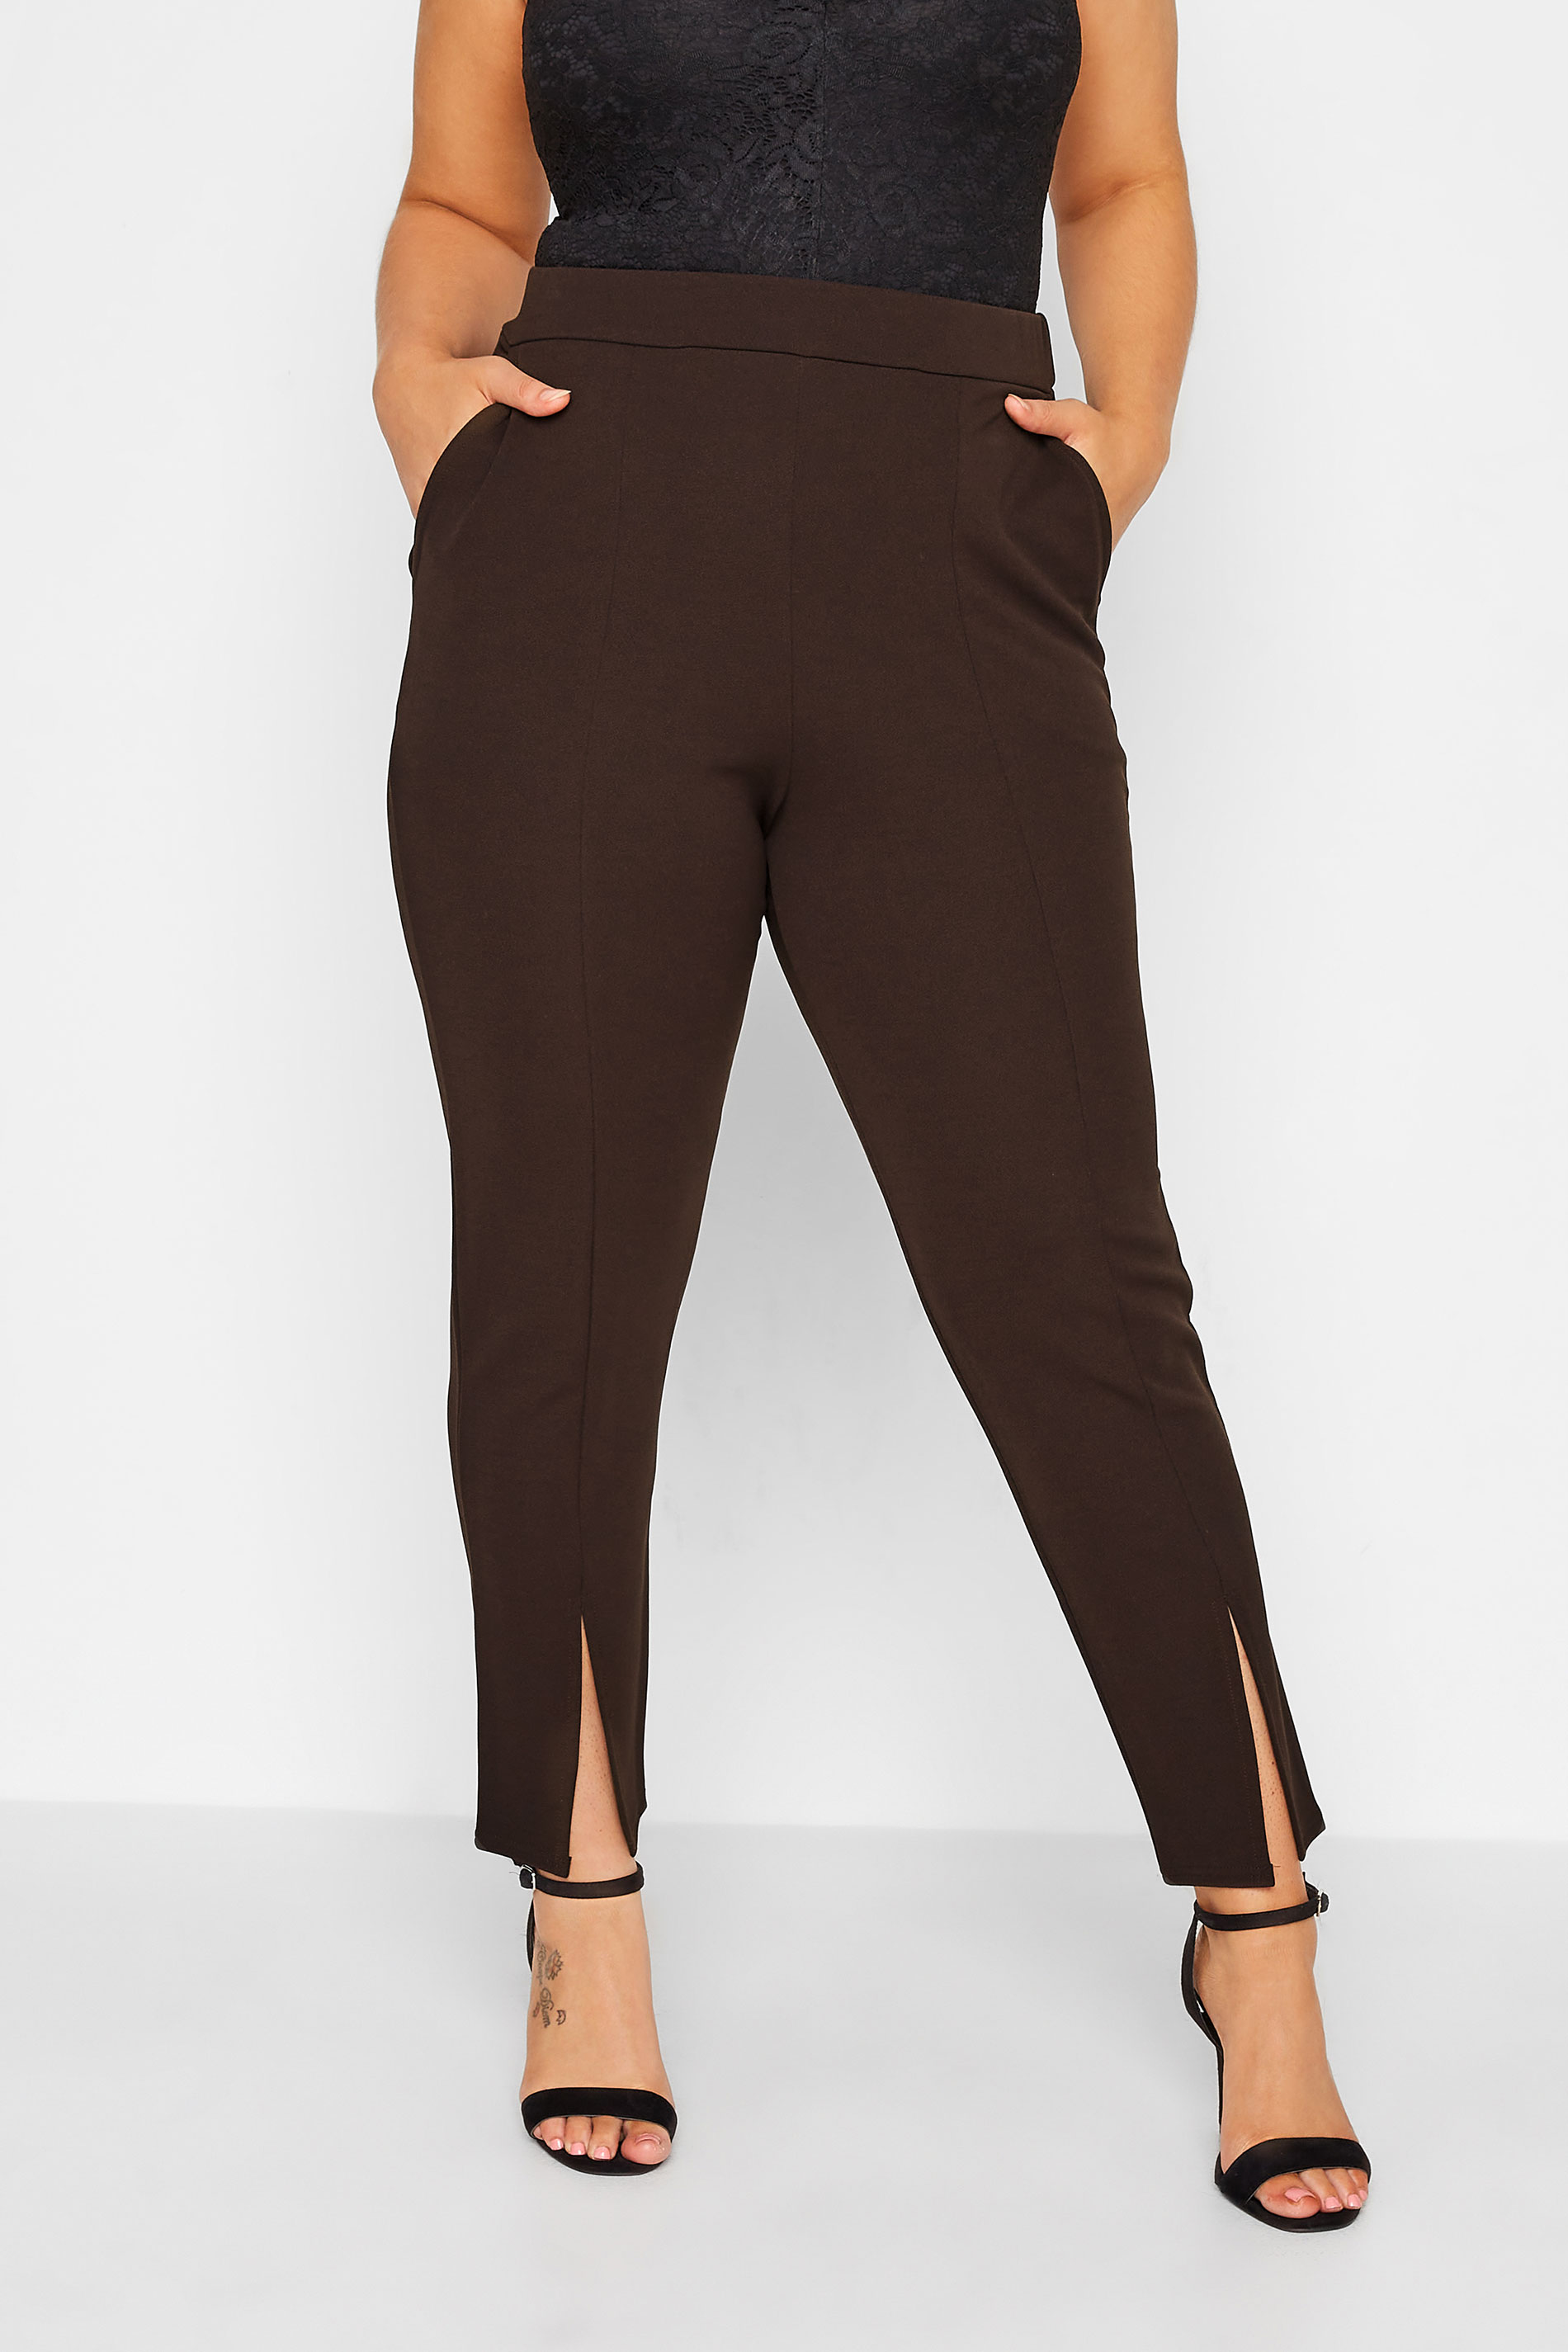 LIMITED COLLECTION Plus Size Chocolate Brown Split Hem Tapered Trousers | Yours Clothing  1